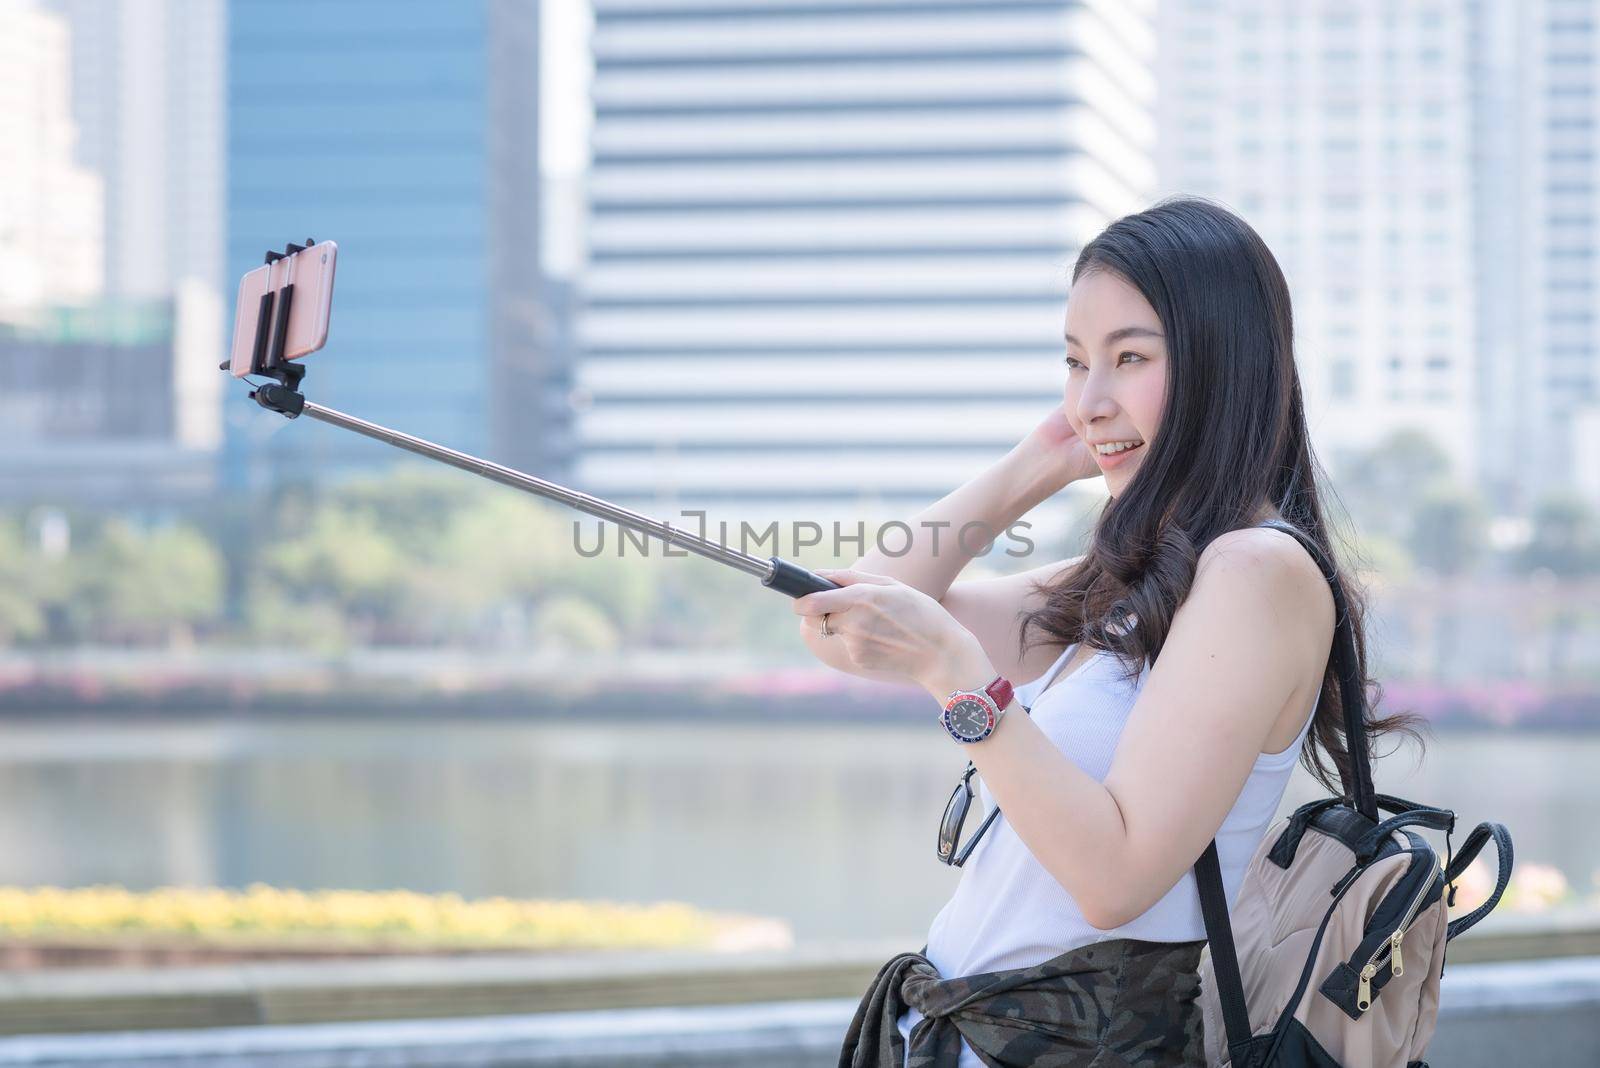 Beautiful asian tourist woman taking selfies on a smartphone in urban city downtown. Vacation travel in summer.